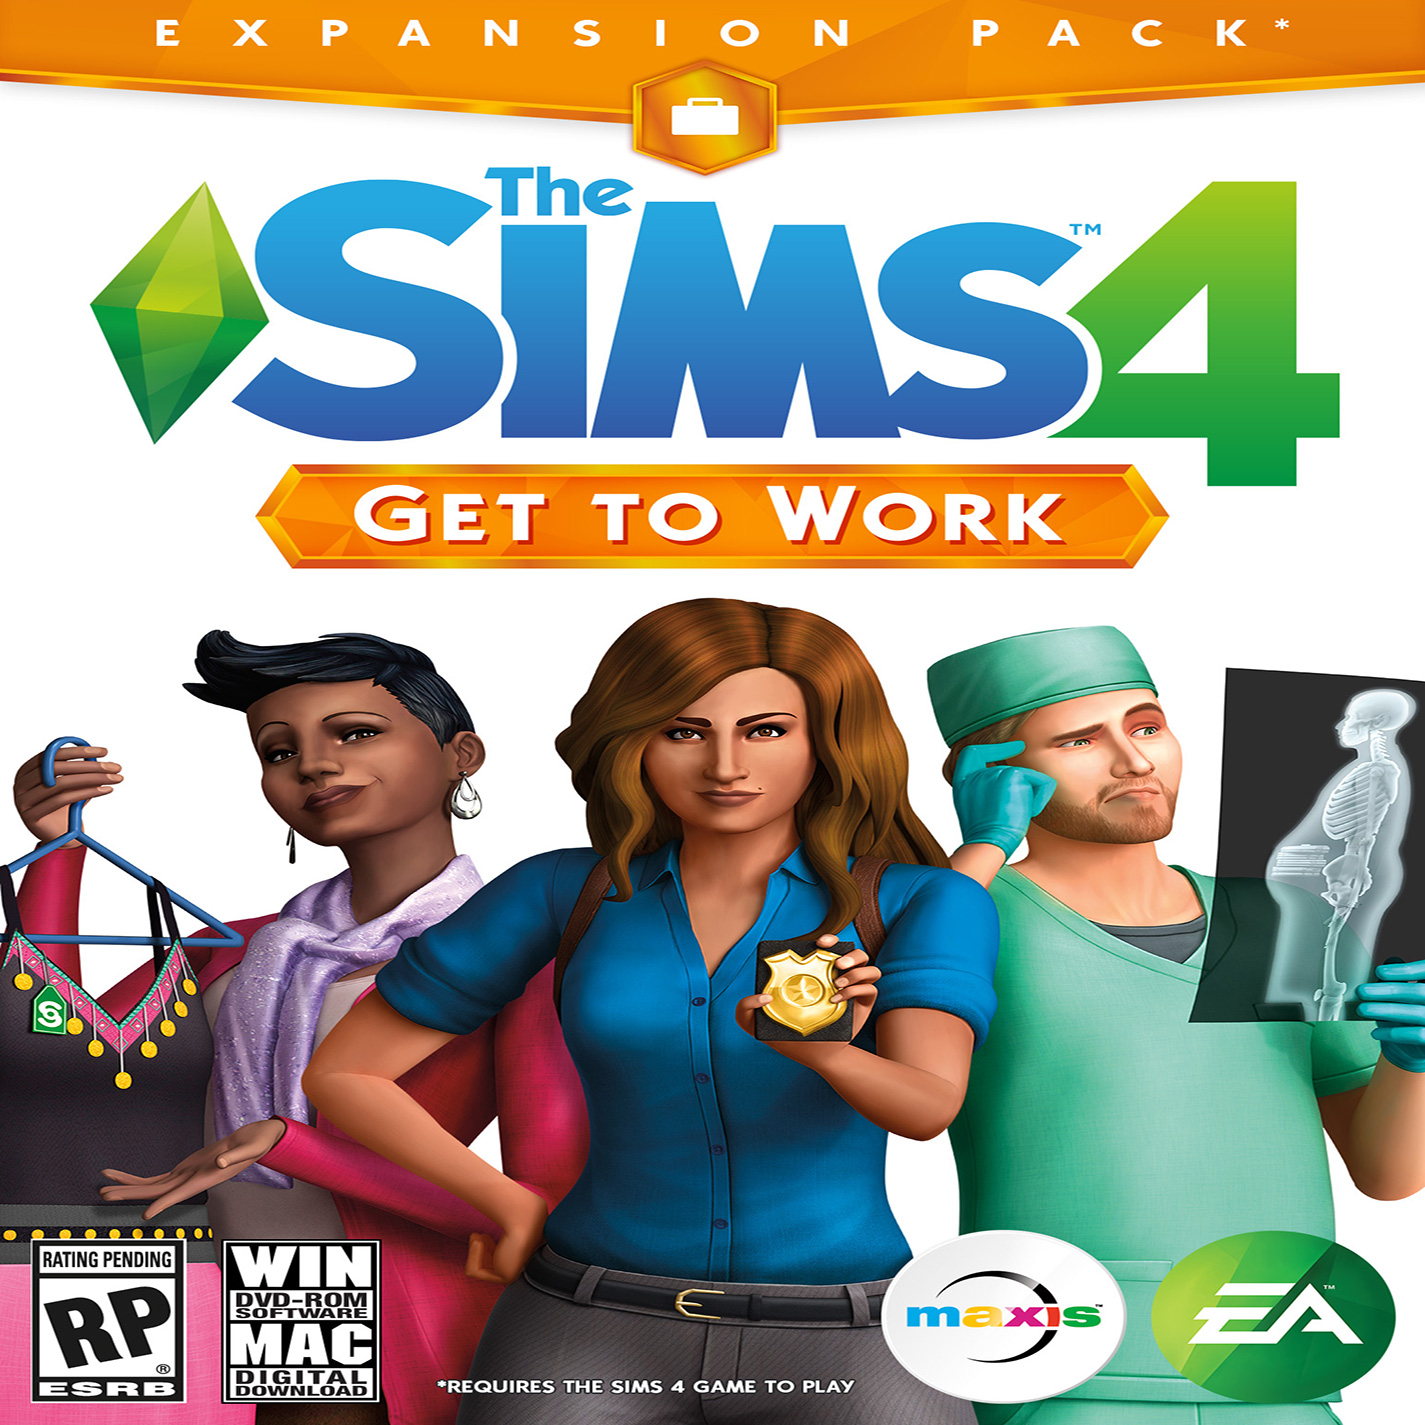 The Sims 4: Get to Work - pedn CD obal